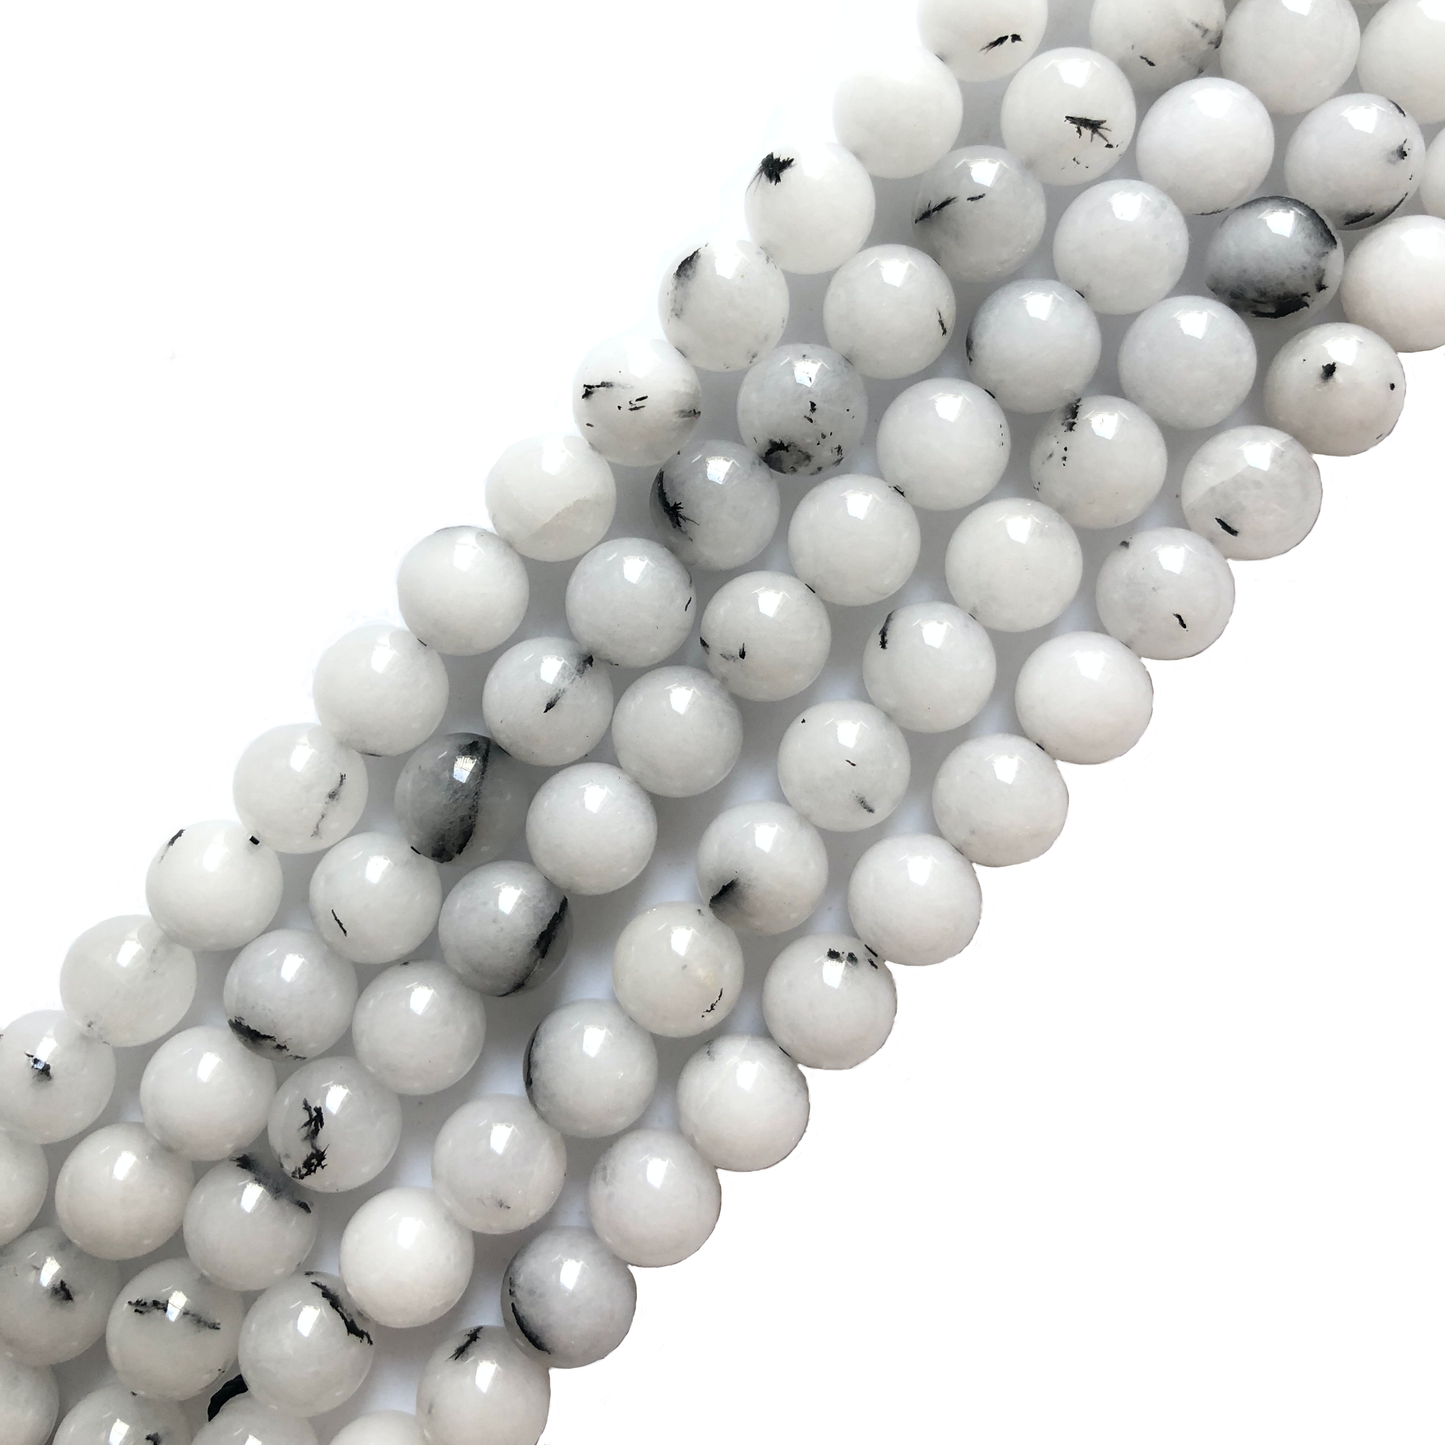 2 Strands/lot 10mm White Opal Round Stone Beads Stone Beads Other Stone Beads Charms Beads Beyond